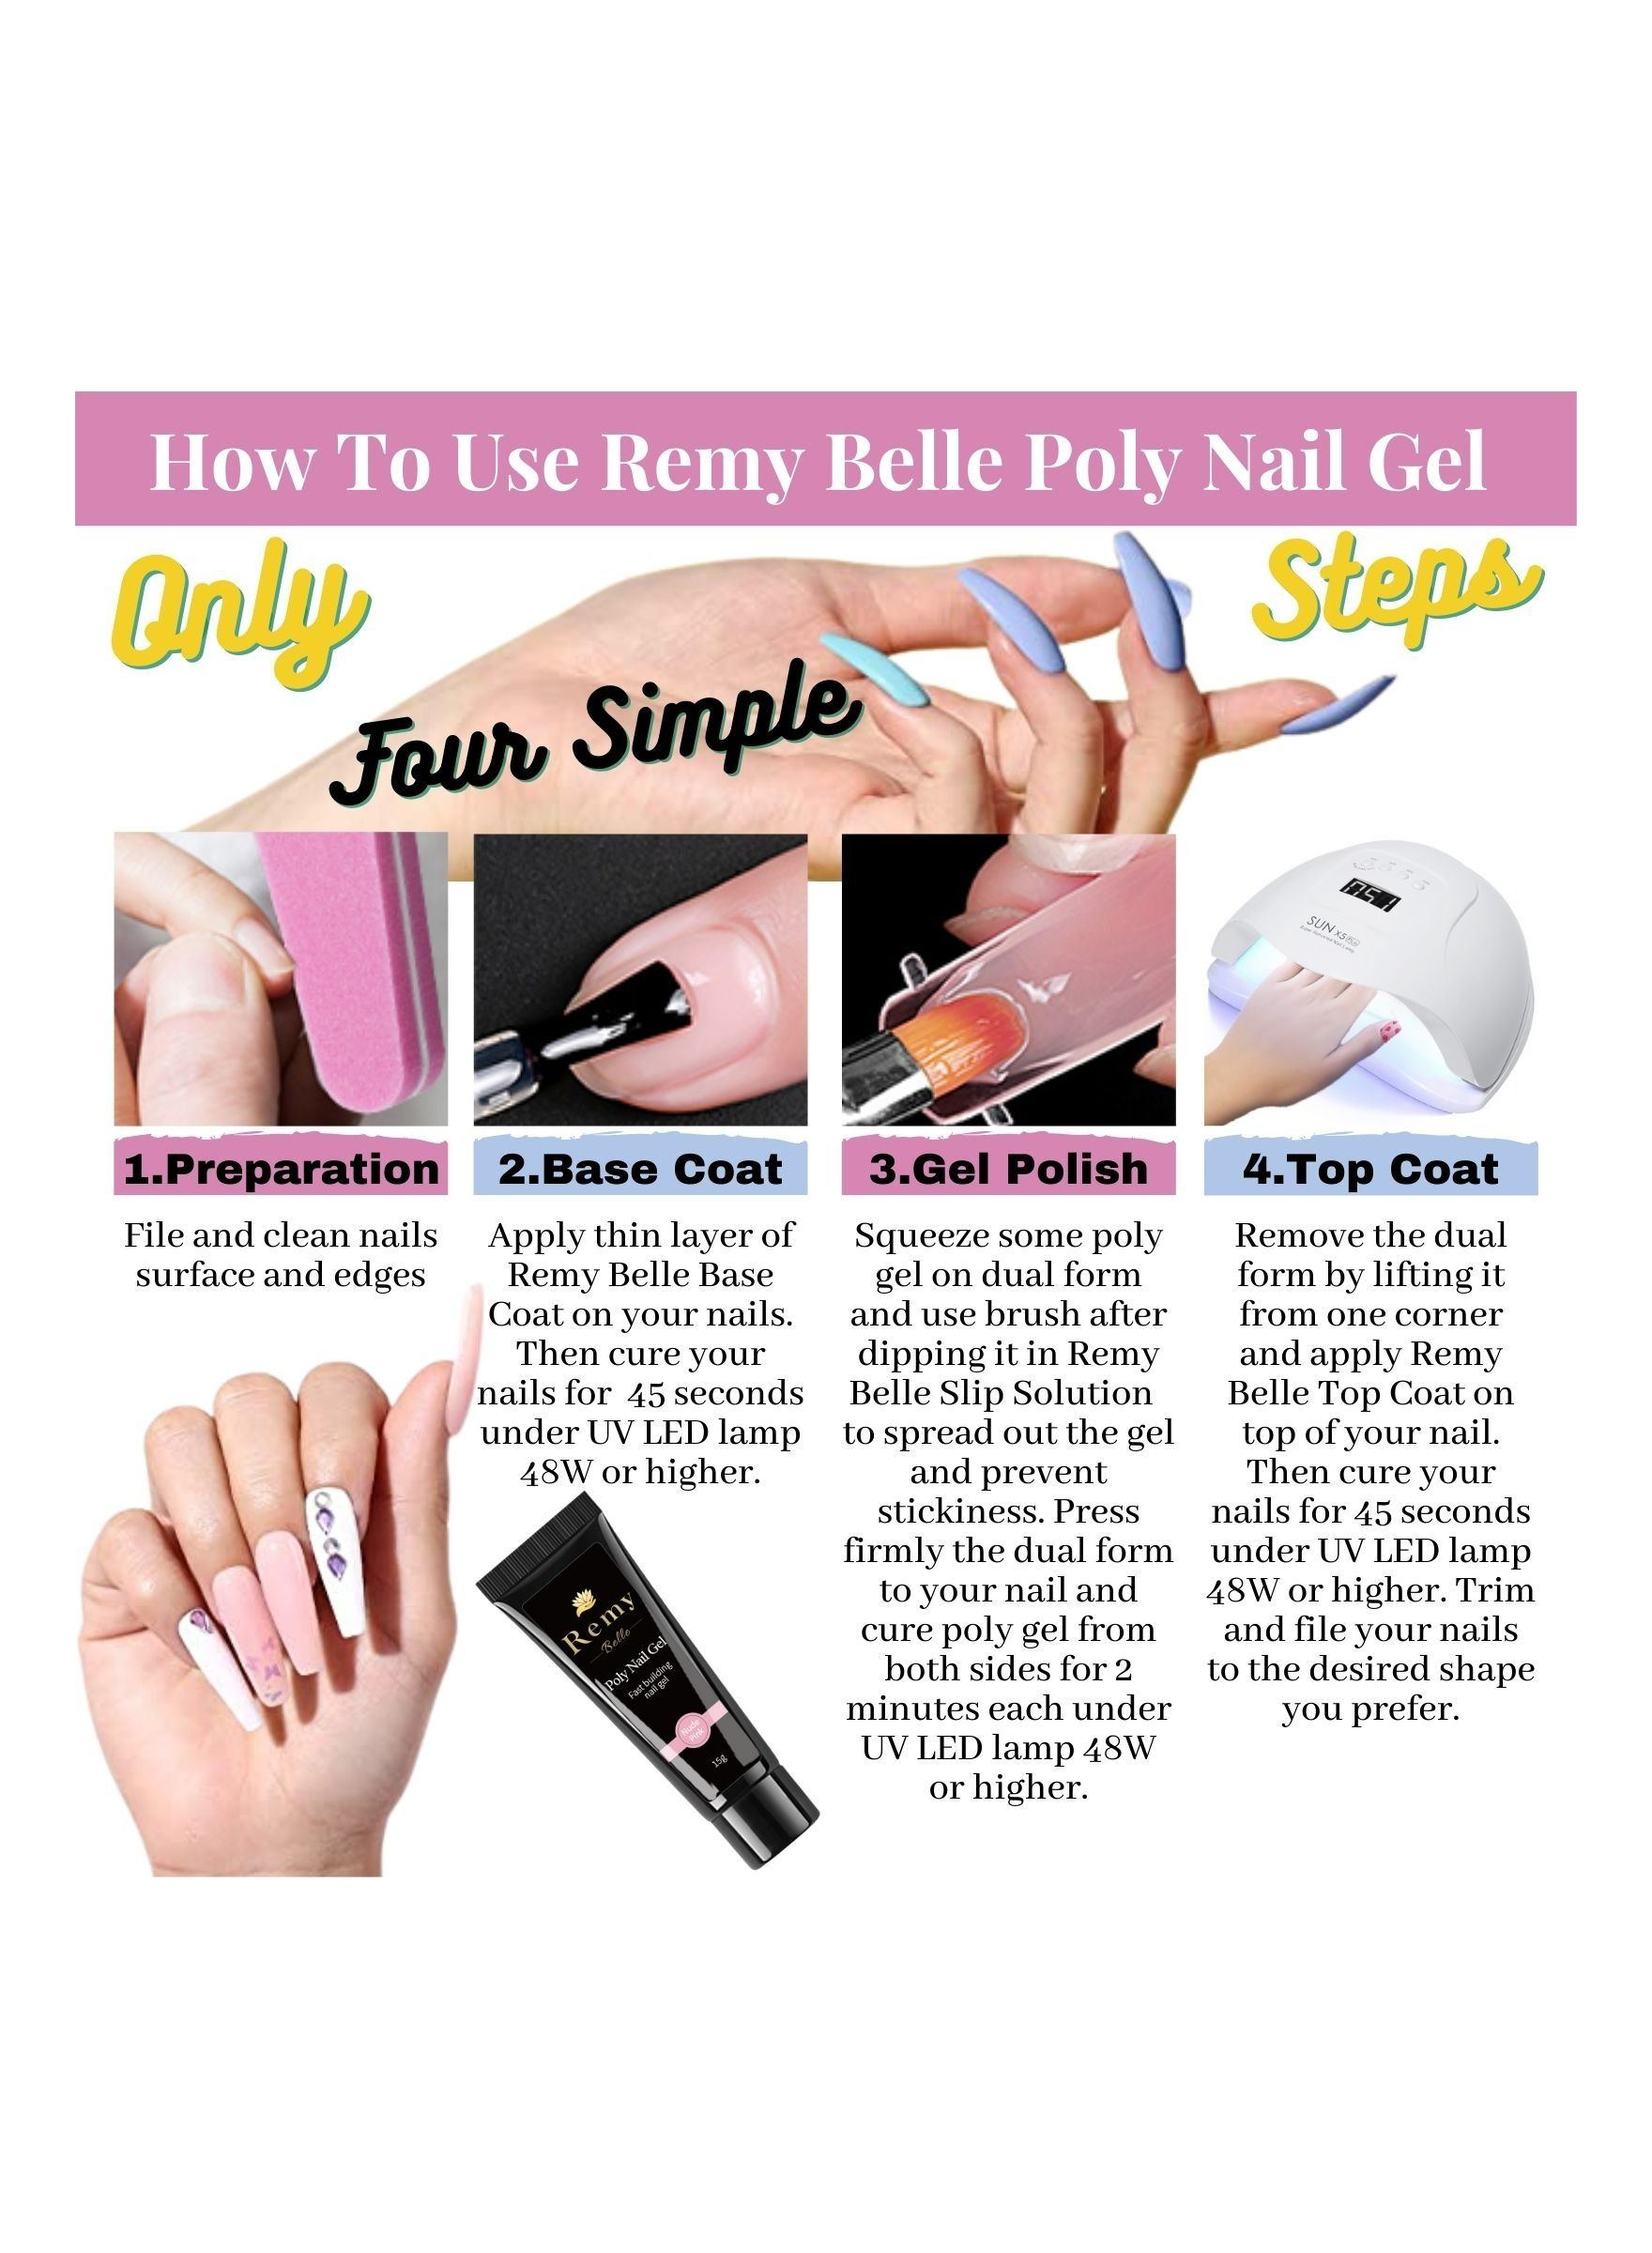 Poly Nail Gel Acrylic Kit 6 Colors with Slip Solution Top Base Coat All One Kit for Nail Manicure DIY at Home (Nude) 